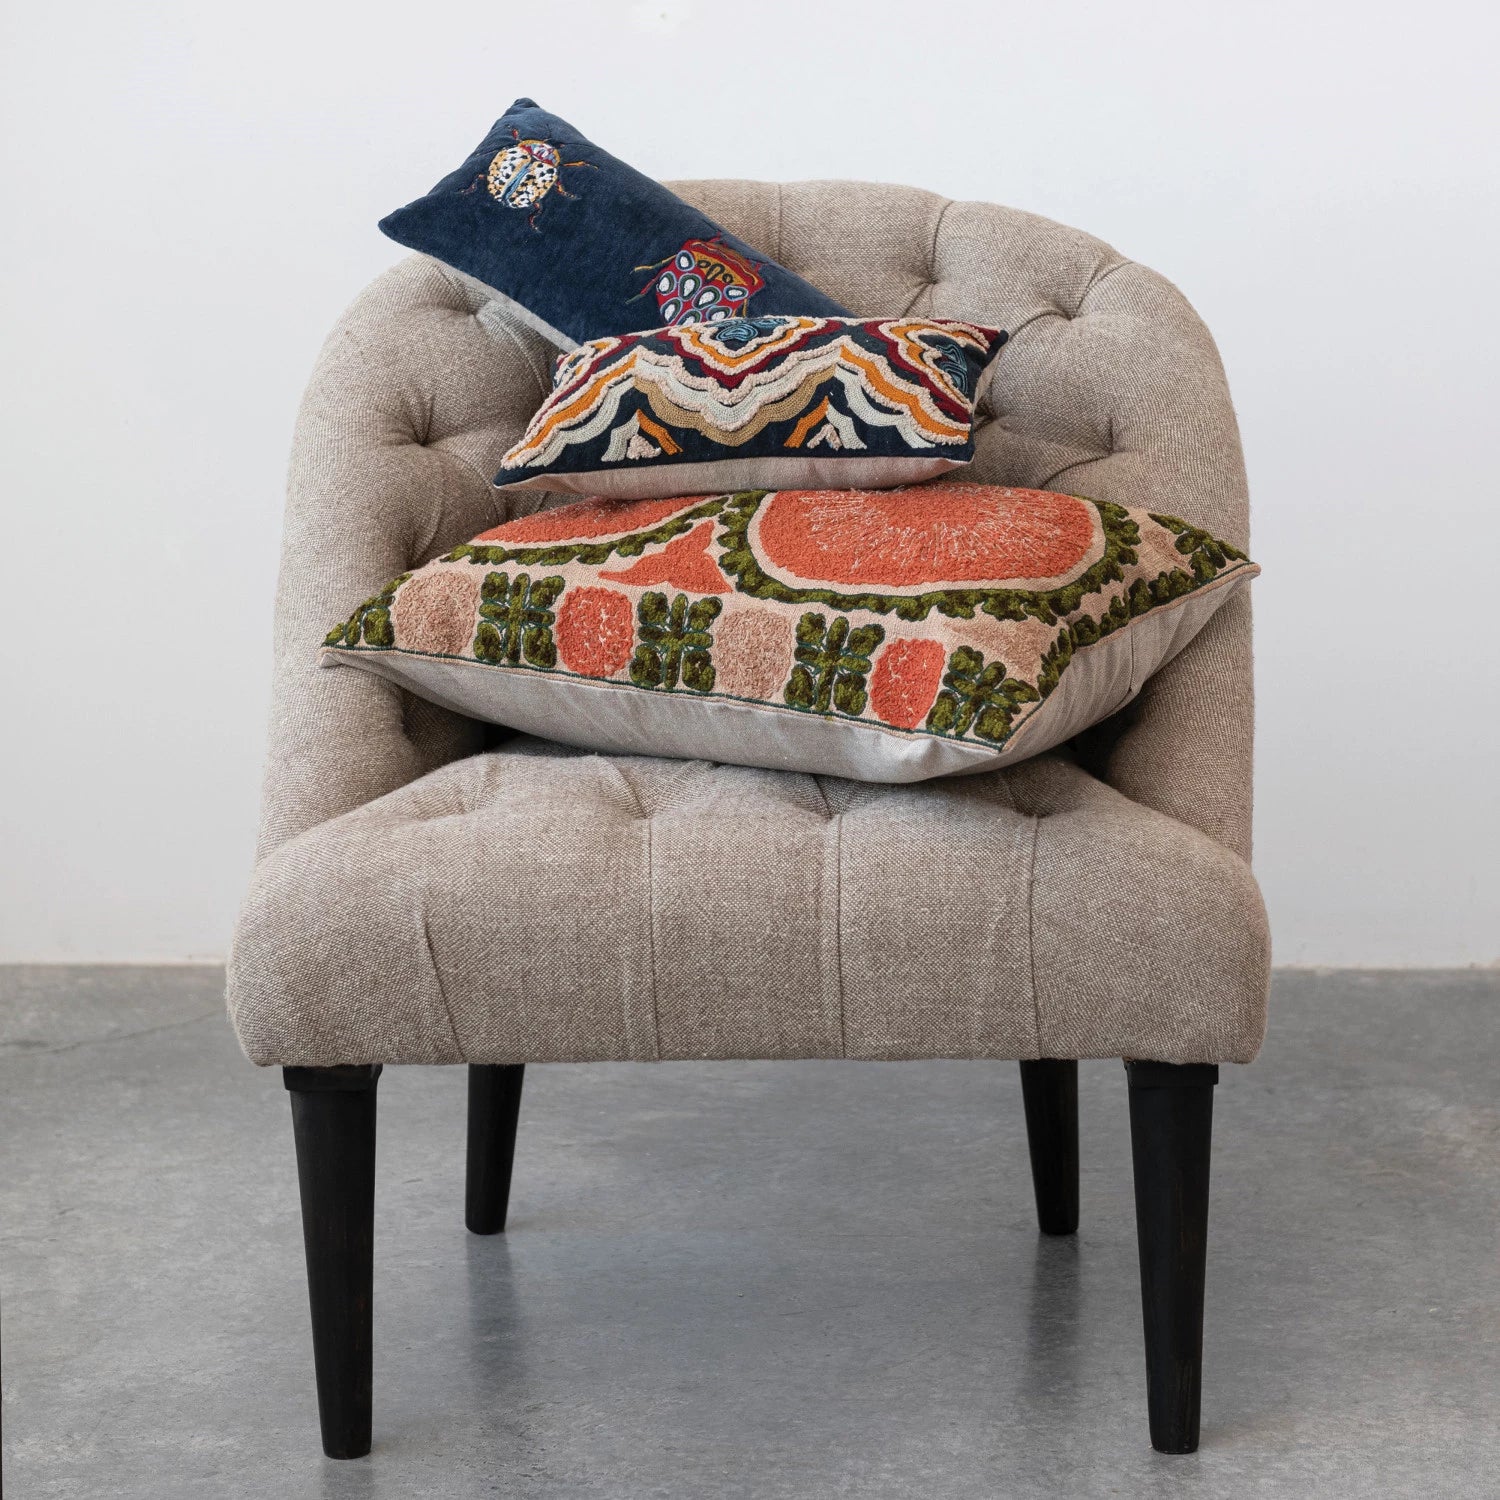 blue velvet embroidered lumbar pillow with beetles displayed at the top of a stack of pillows on a tan side chair